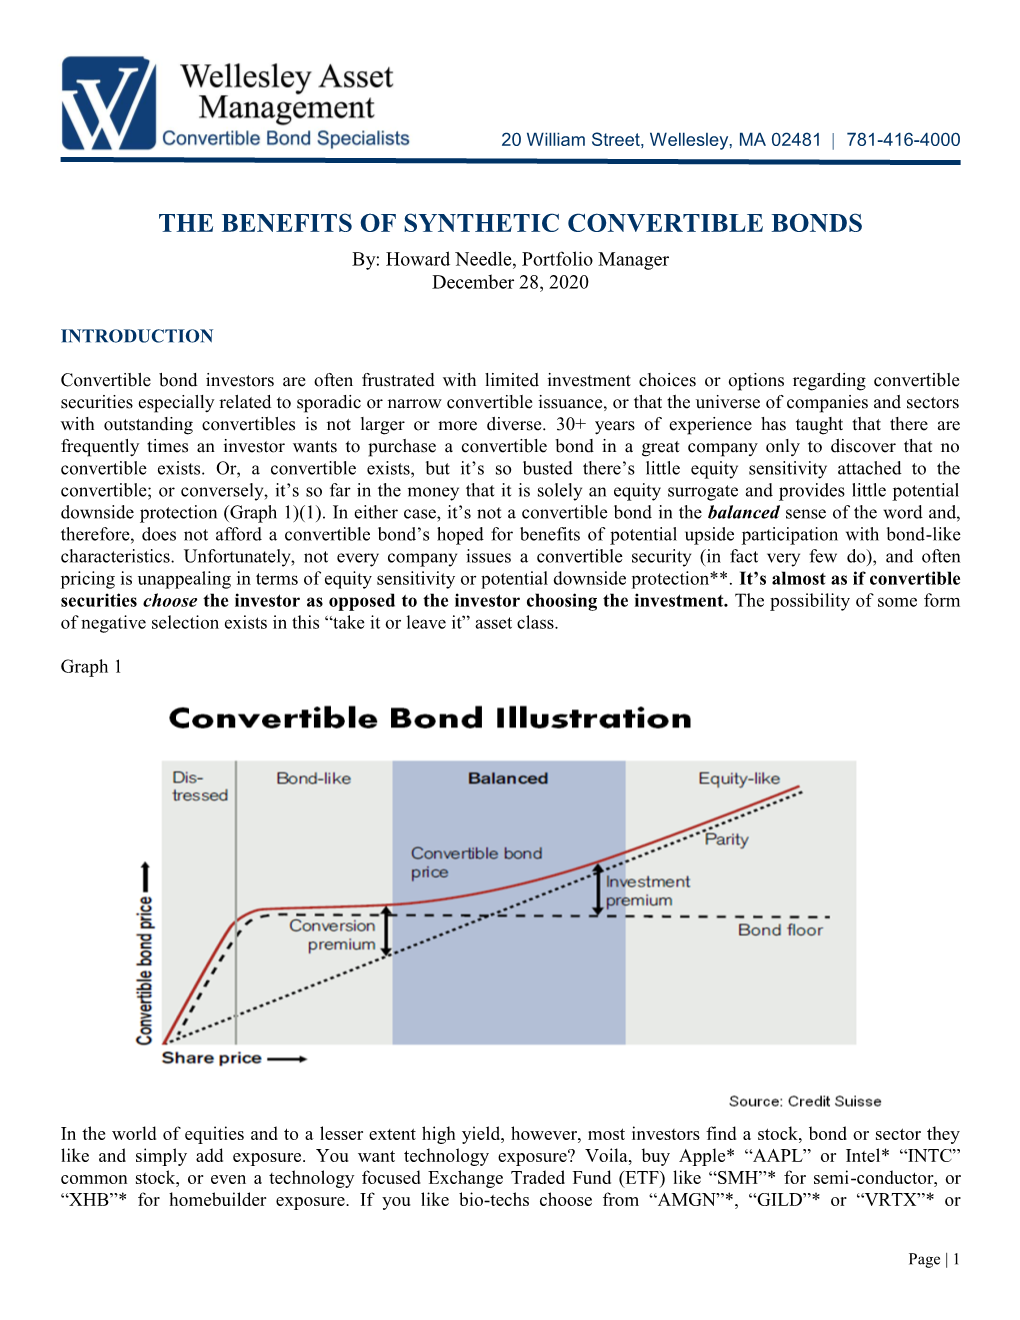 THE BENEFITS of SYNTHETIC CONVERTIBLE BONDS By: Howard Needle, Portfolio Manager December 28, 2020